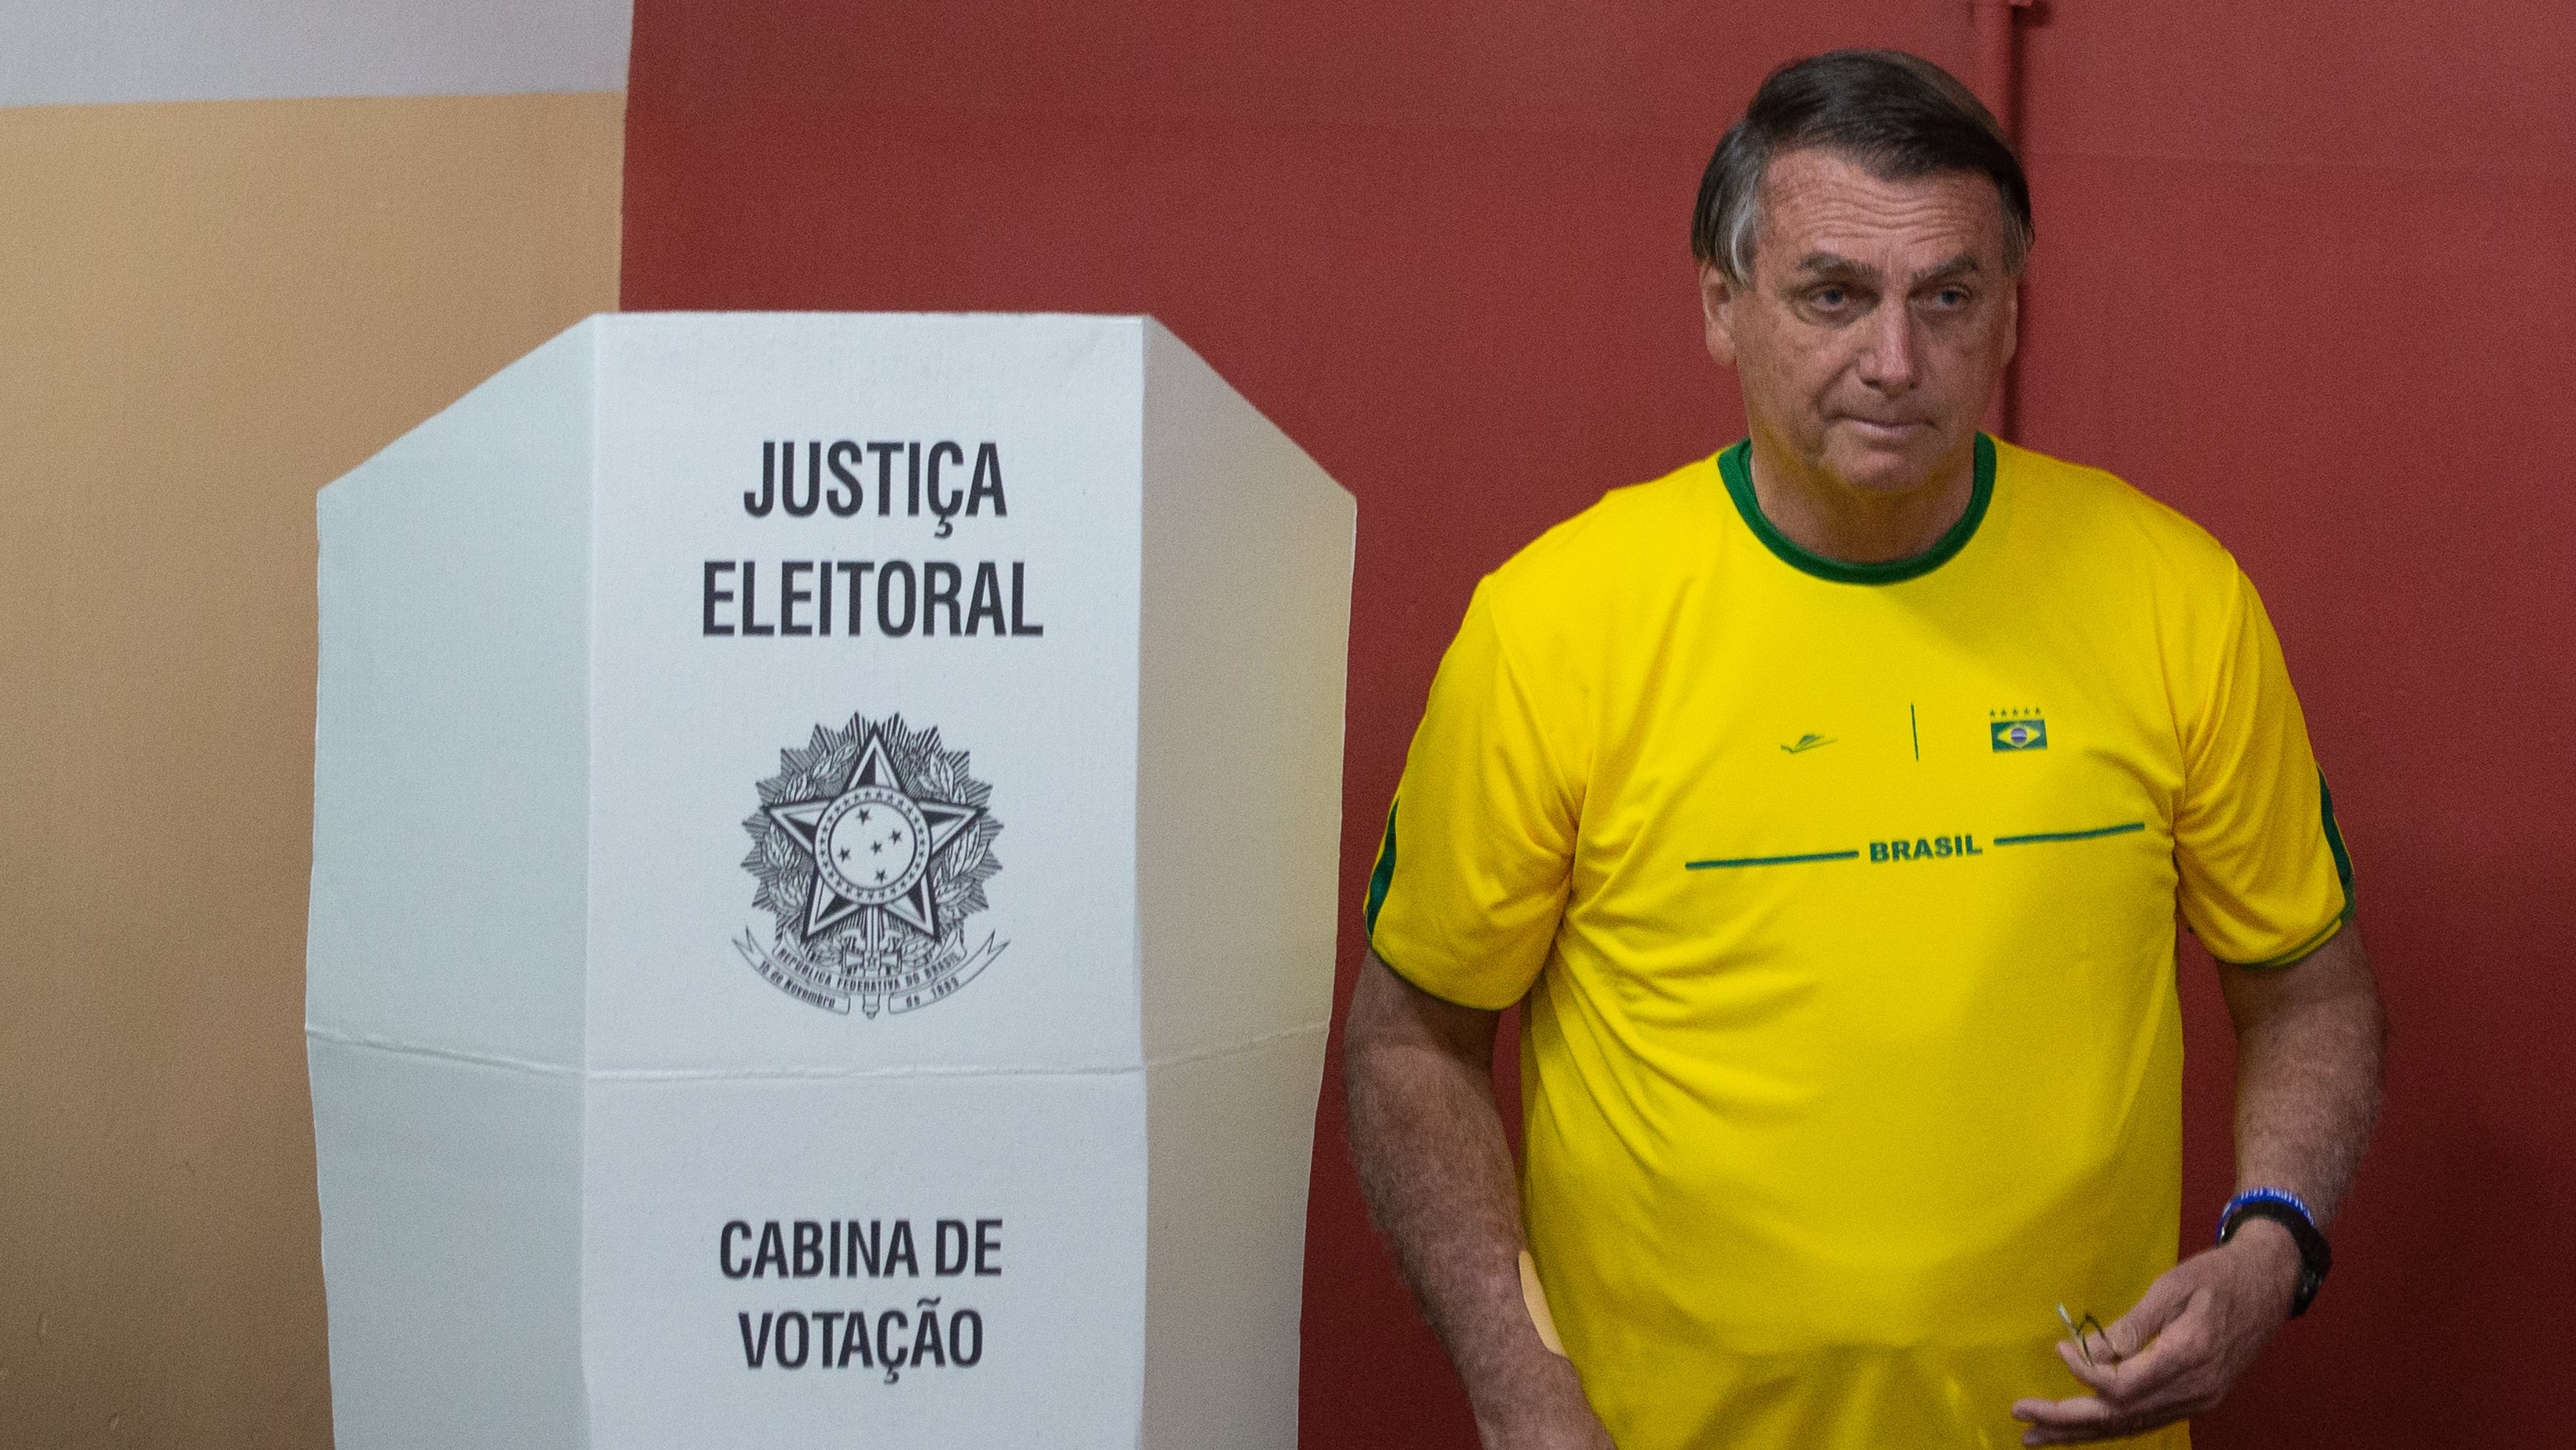 Brazilians Head to The Polls in Tight Elections Polarized between Lula and Bolsonaro